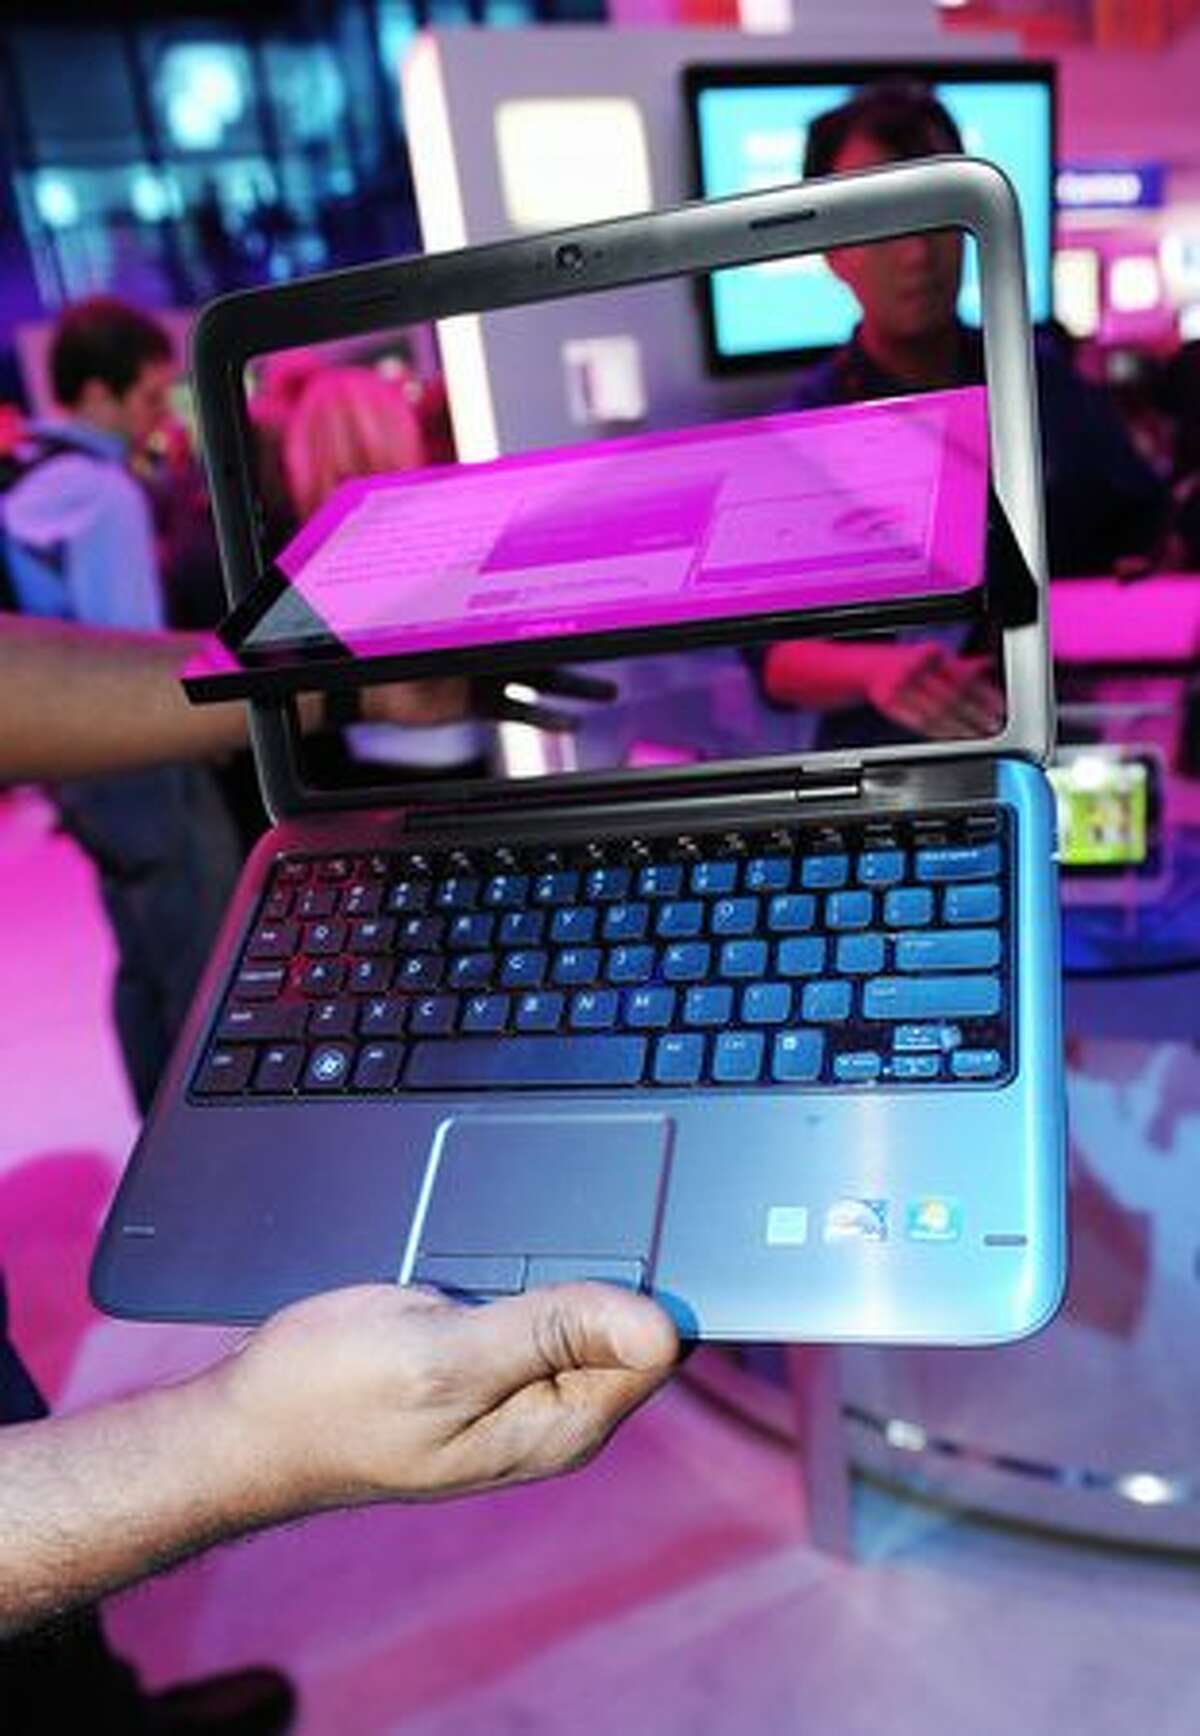 The Dell Inspiron Duo with touch-sensitive screen is on display Jan. 6 at the 2011 International Consumer Electronics Show in Las Vegas.